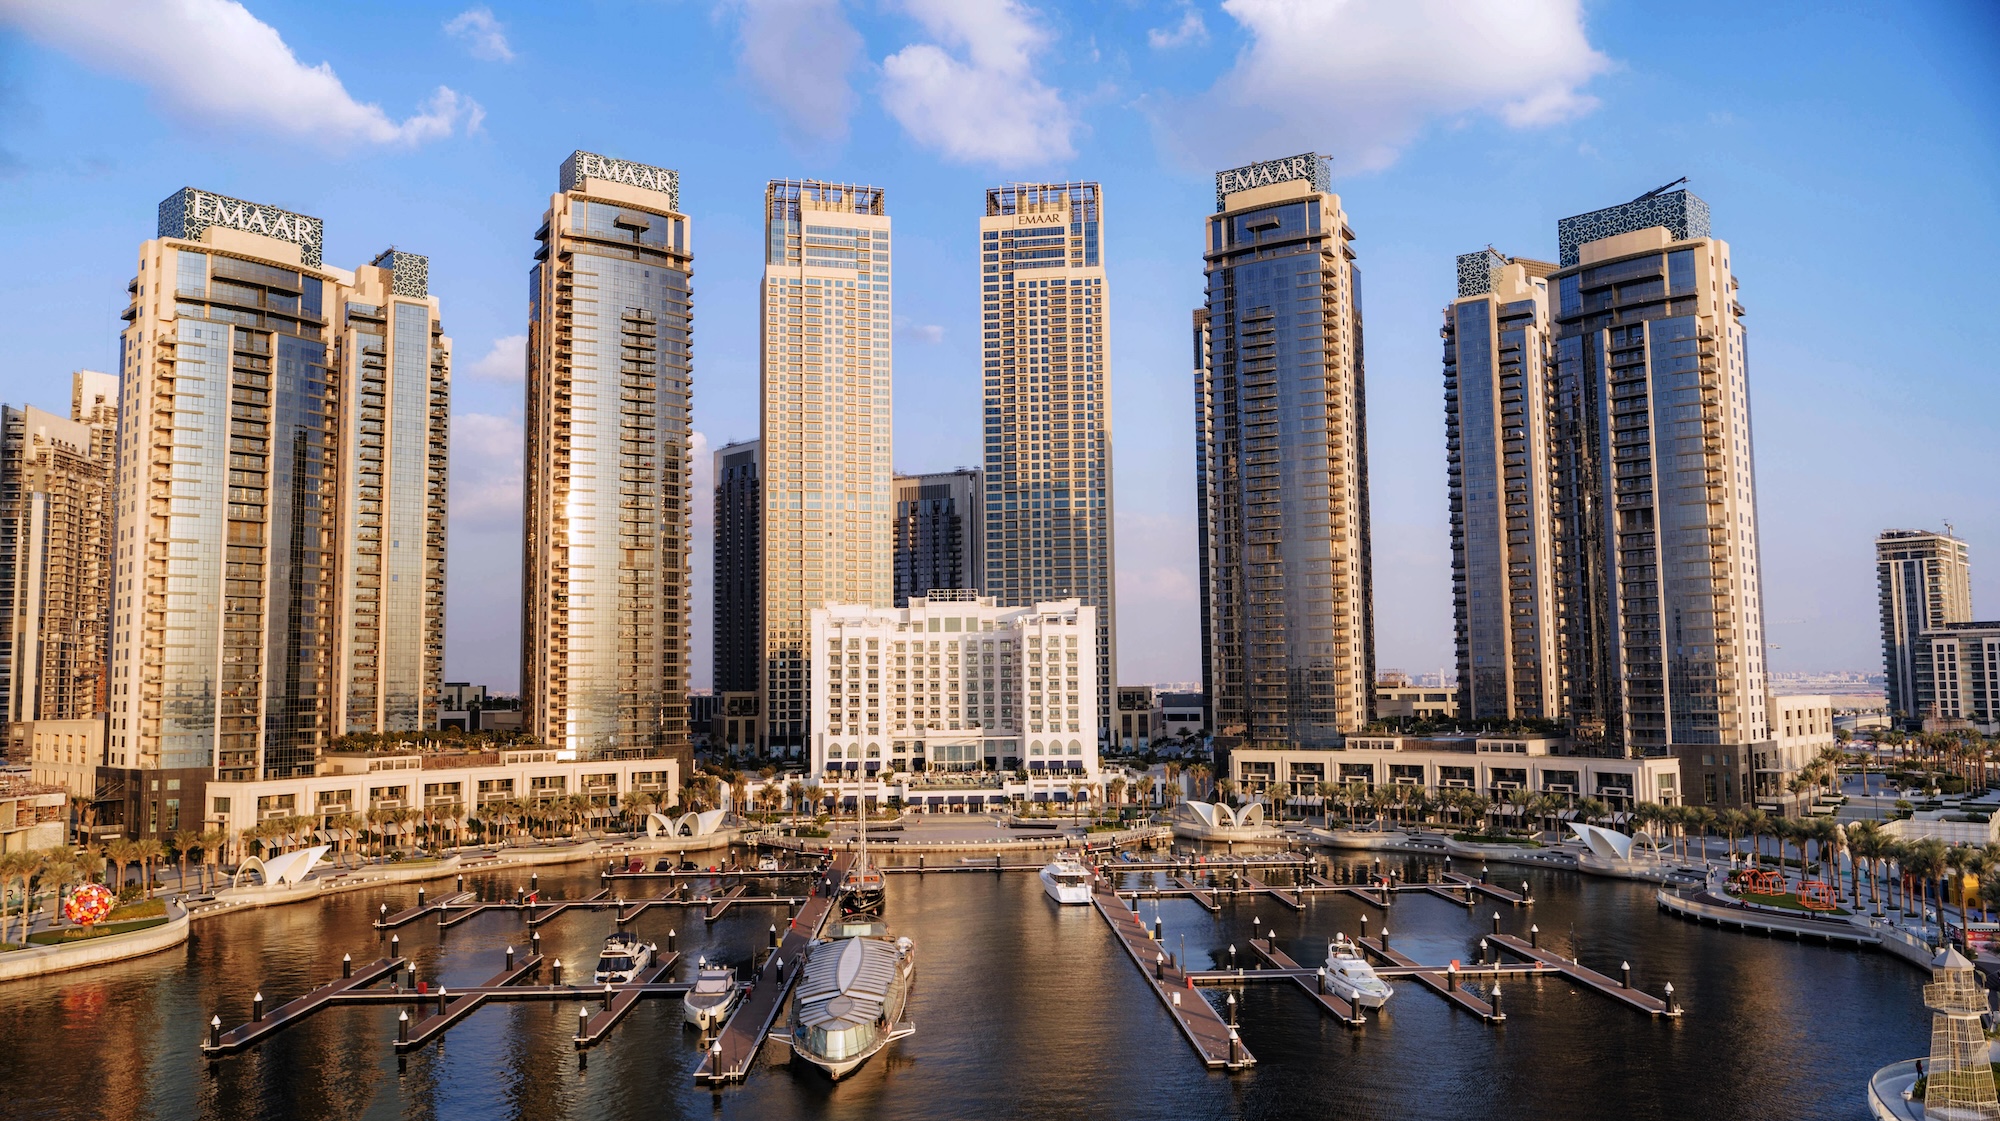 Emaar Properties Comes to the Rescue: Mohamed Alabbar Announces Free Home Repairs